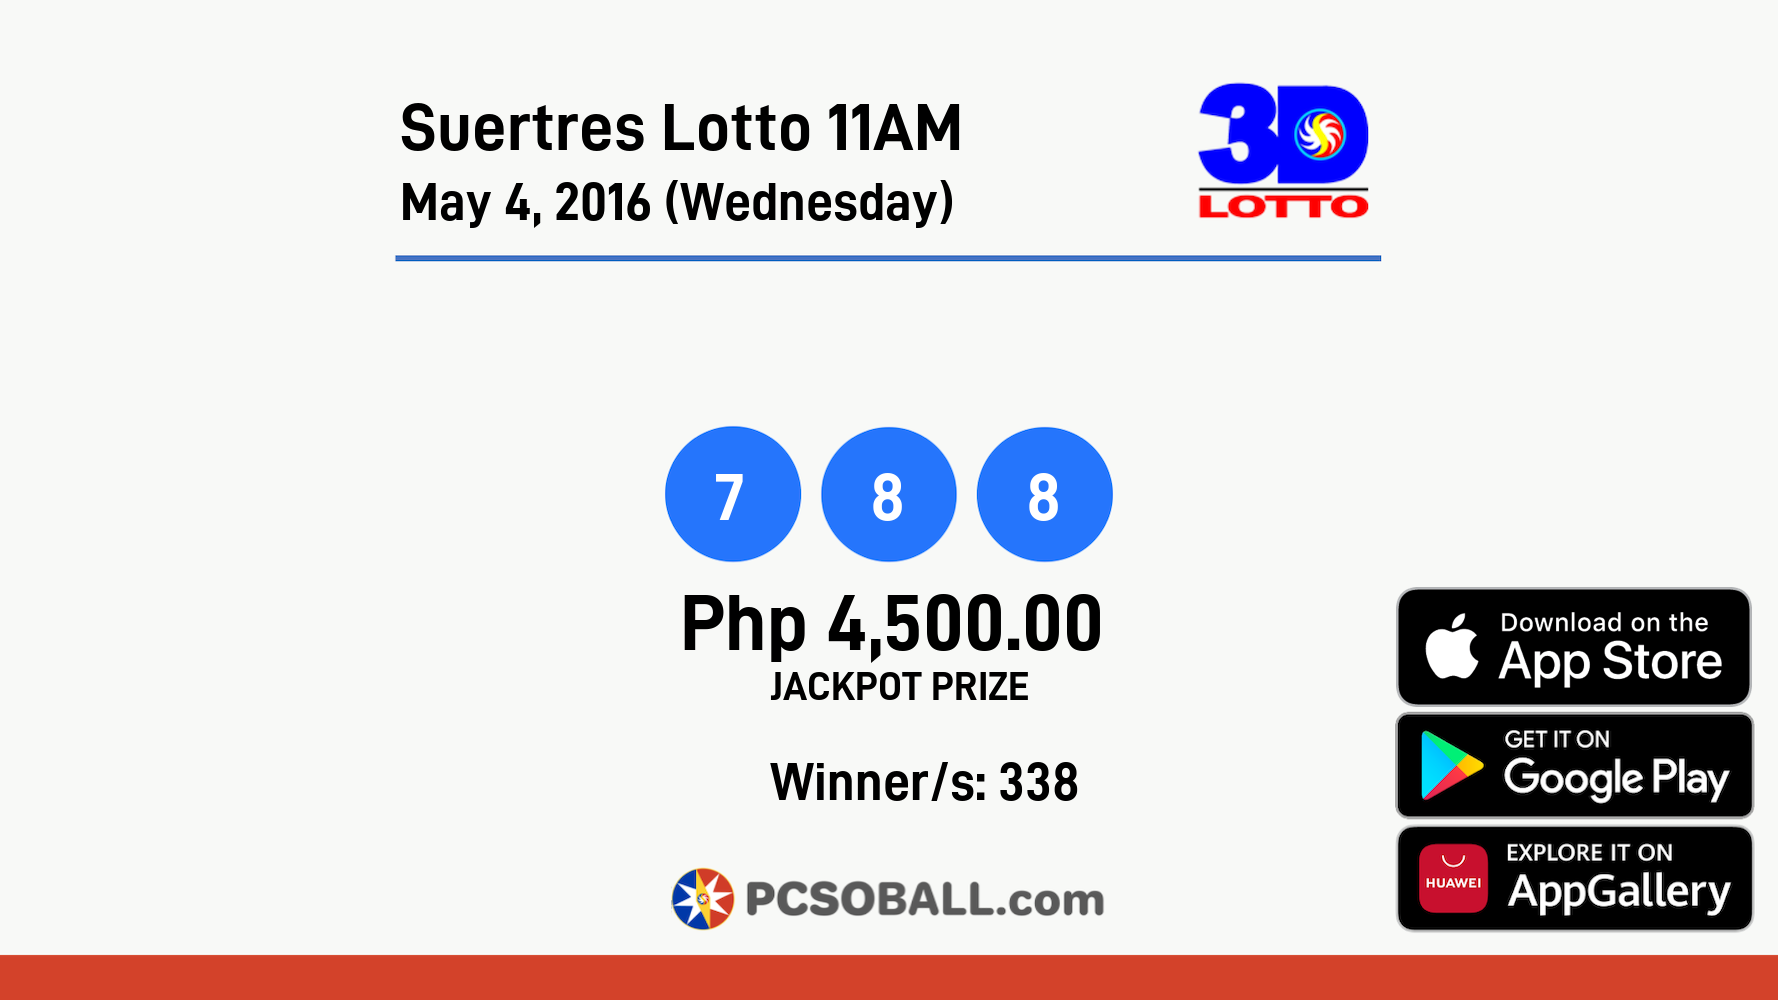 Suertres Lotto 11AM May 4, 2016 (Wednesday) Result